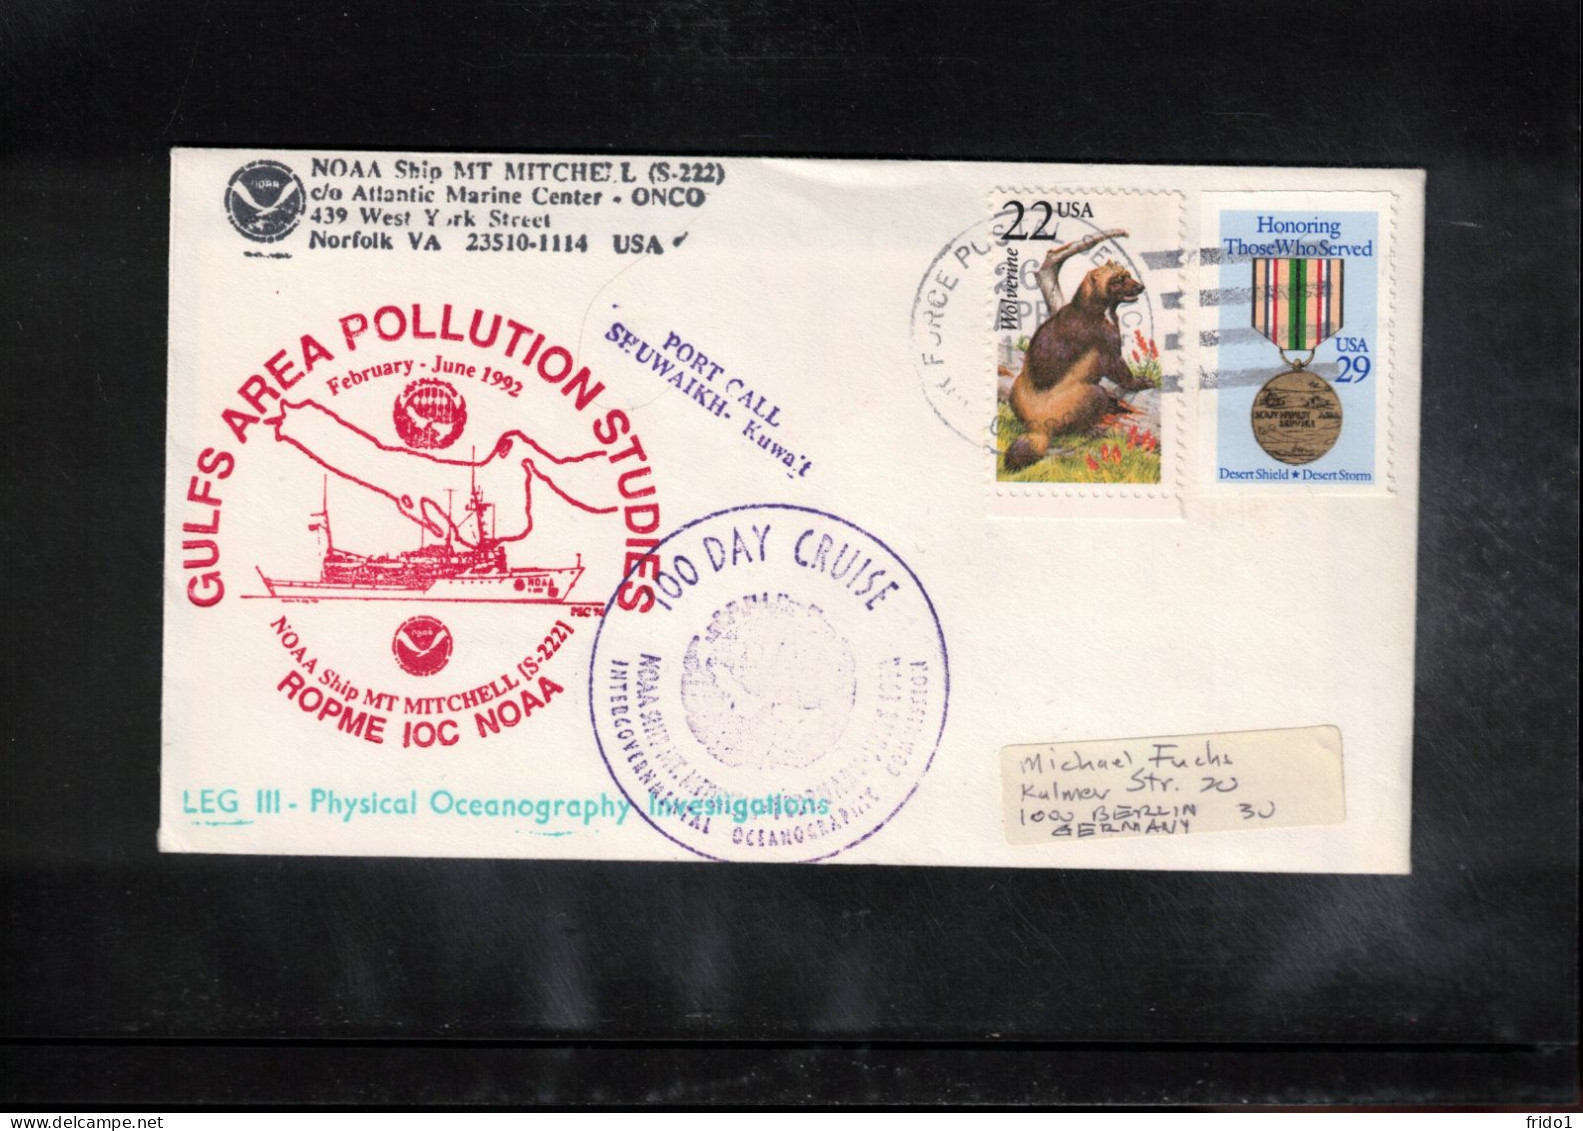 USA 1992 NOAA Ship MT Mitchell - Gulfs Area Pollution Studies Interesting Cover - Lettres & Documents